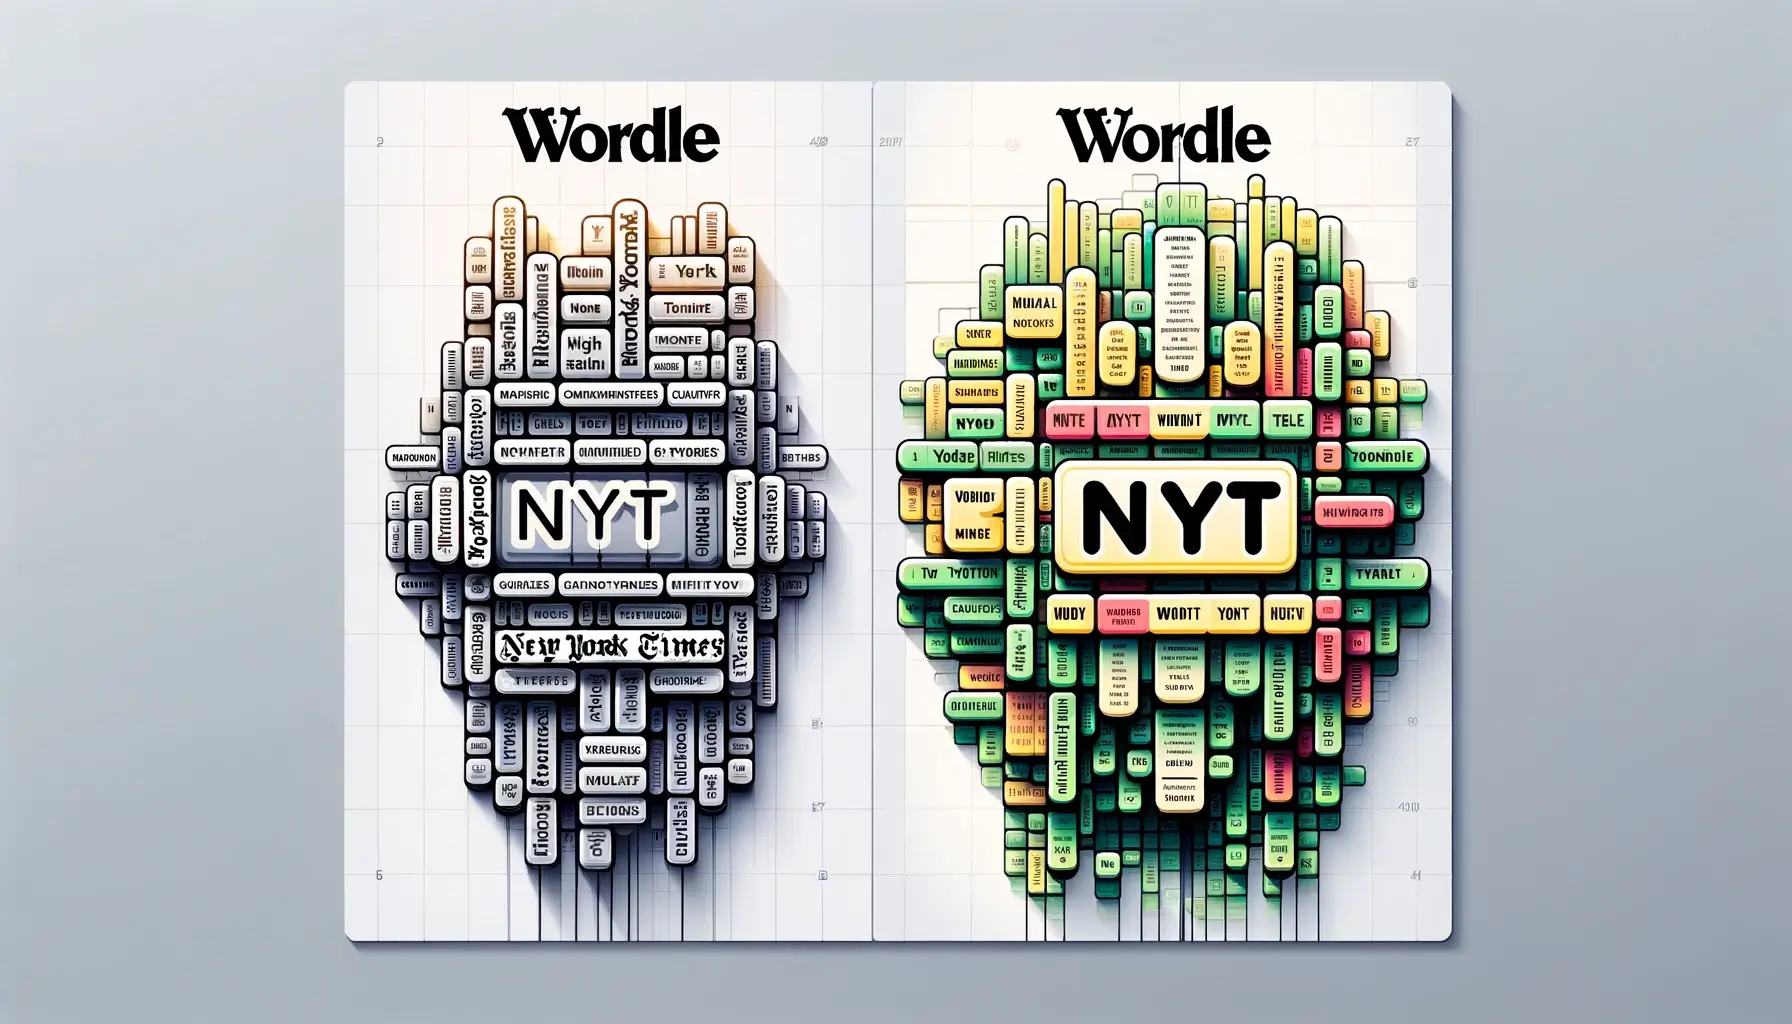 Wordle NYT vs Traditional Wordle